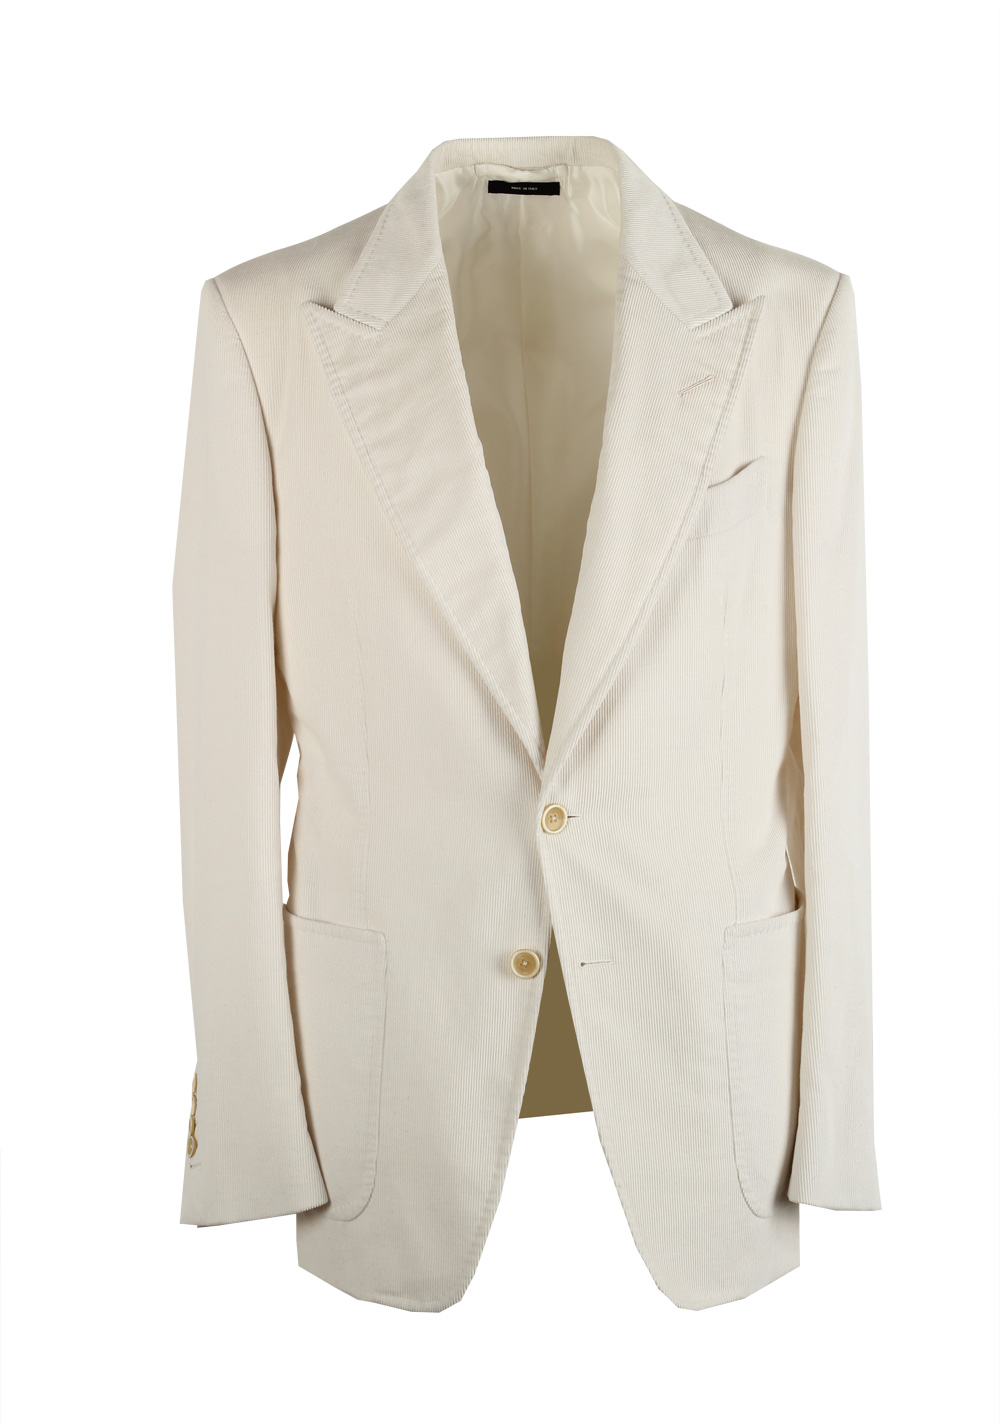 TOM FORD Shelton Off White Sport Coat Size 48 / 38R U.S. In Cotton ...